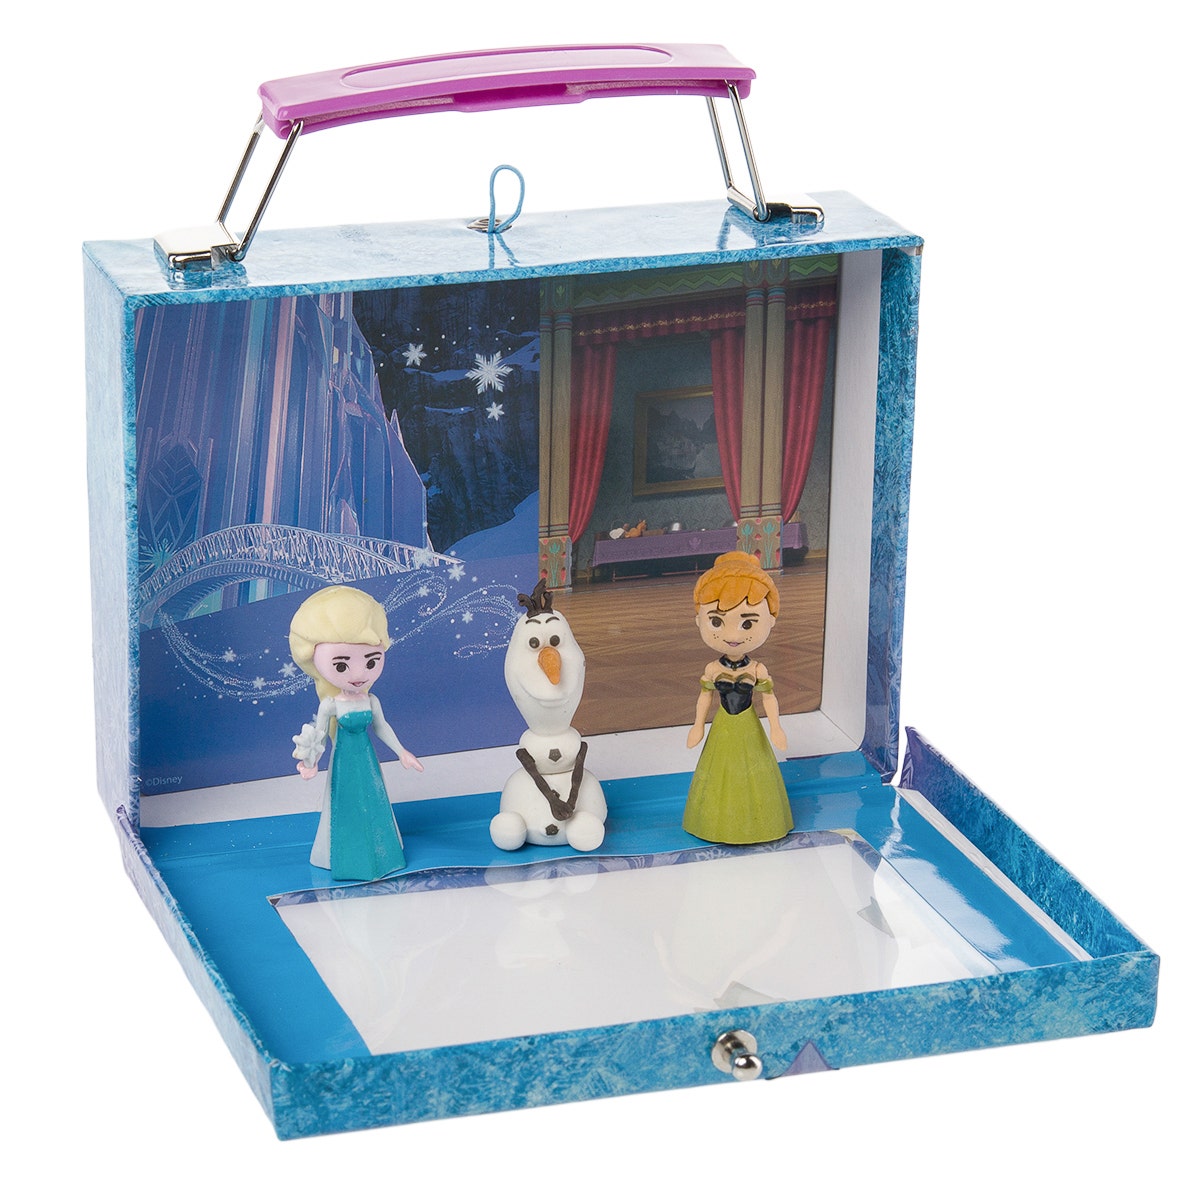 Disney Frozen Collectible Eraser Case With 3 Movie Characters & Play Scene